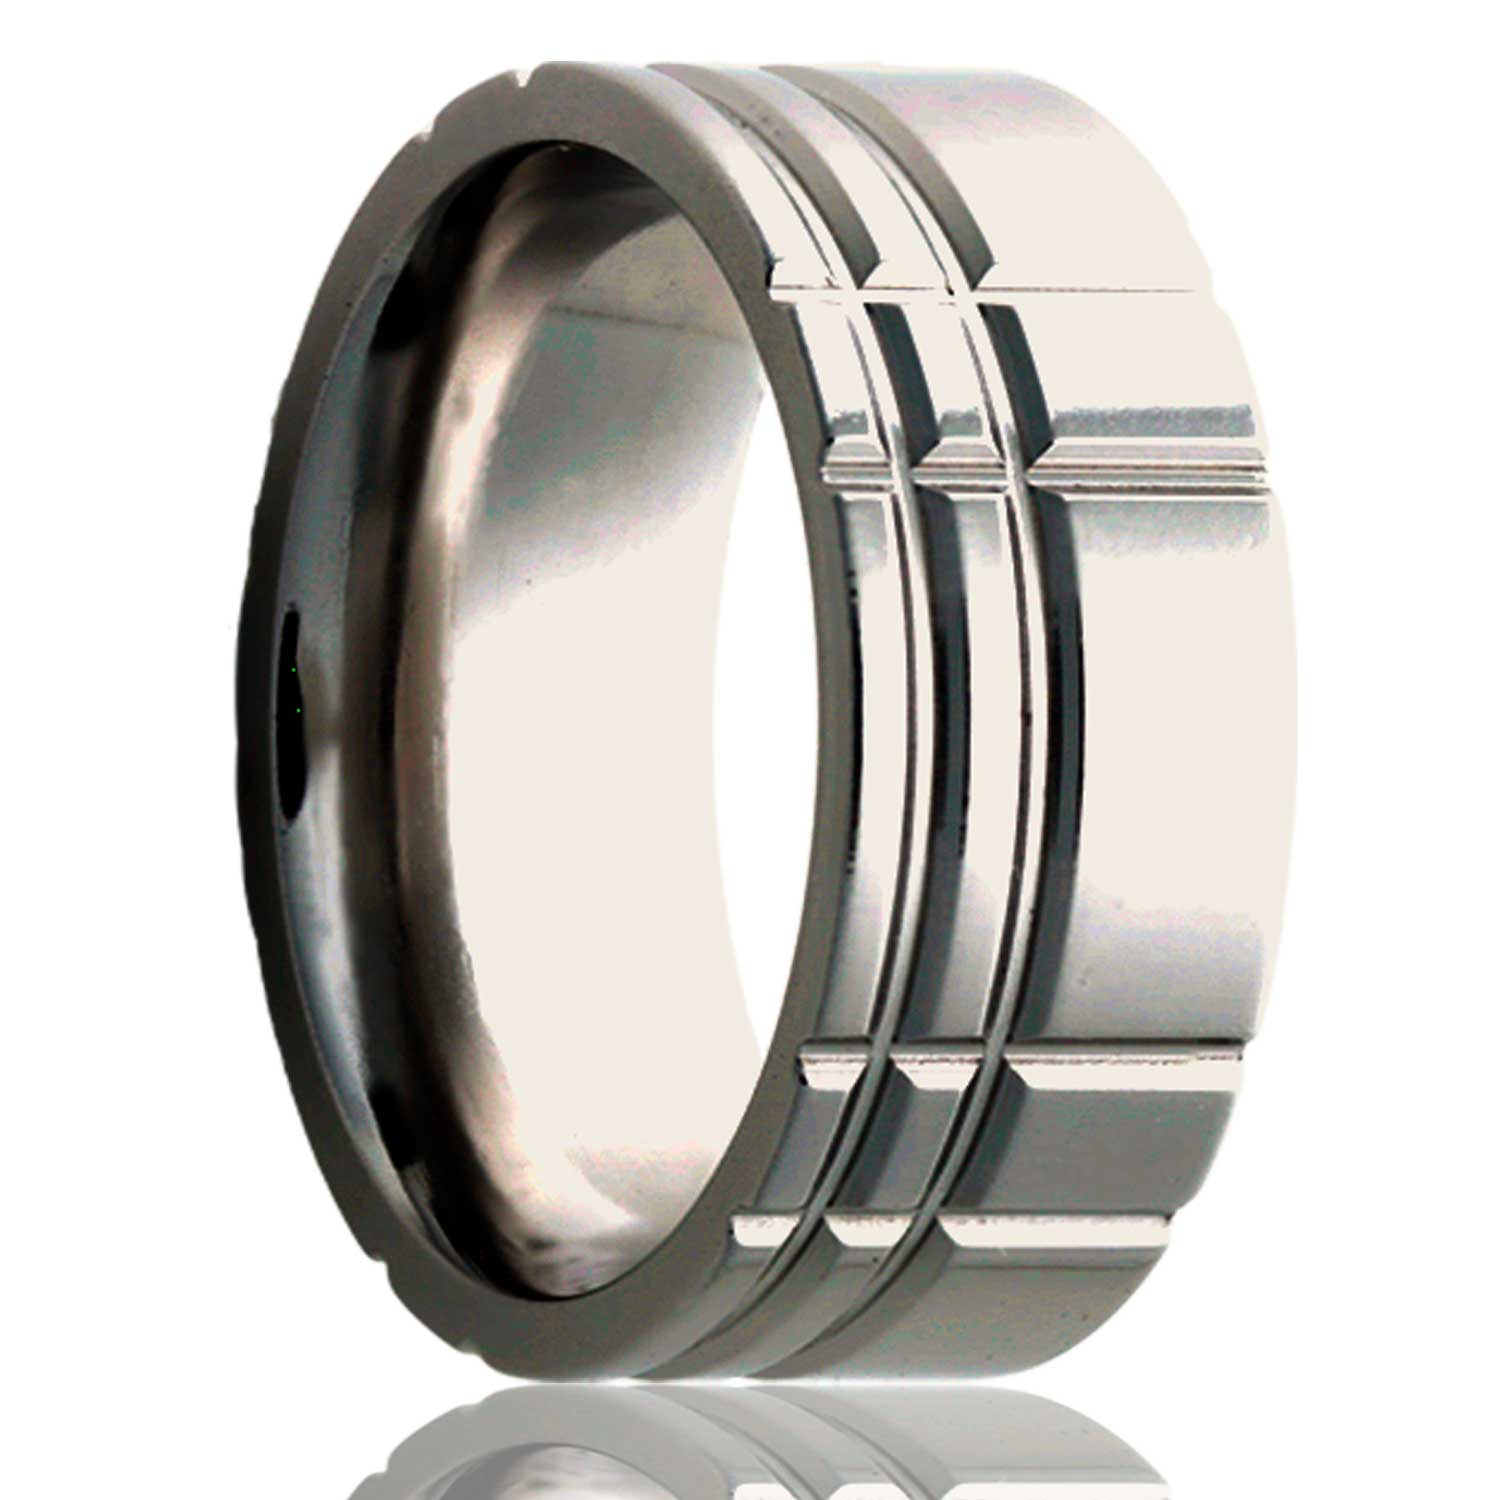 A asymmetrical intersecting grooves titanium wedding band displayed on a neutral white background.